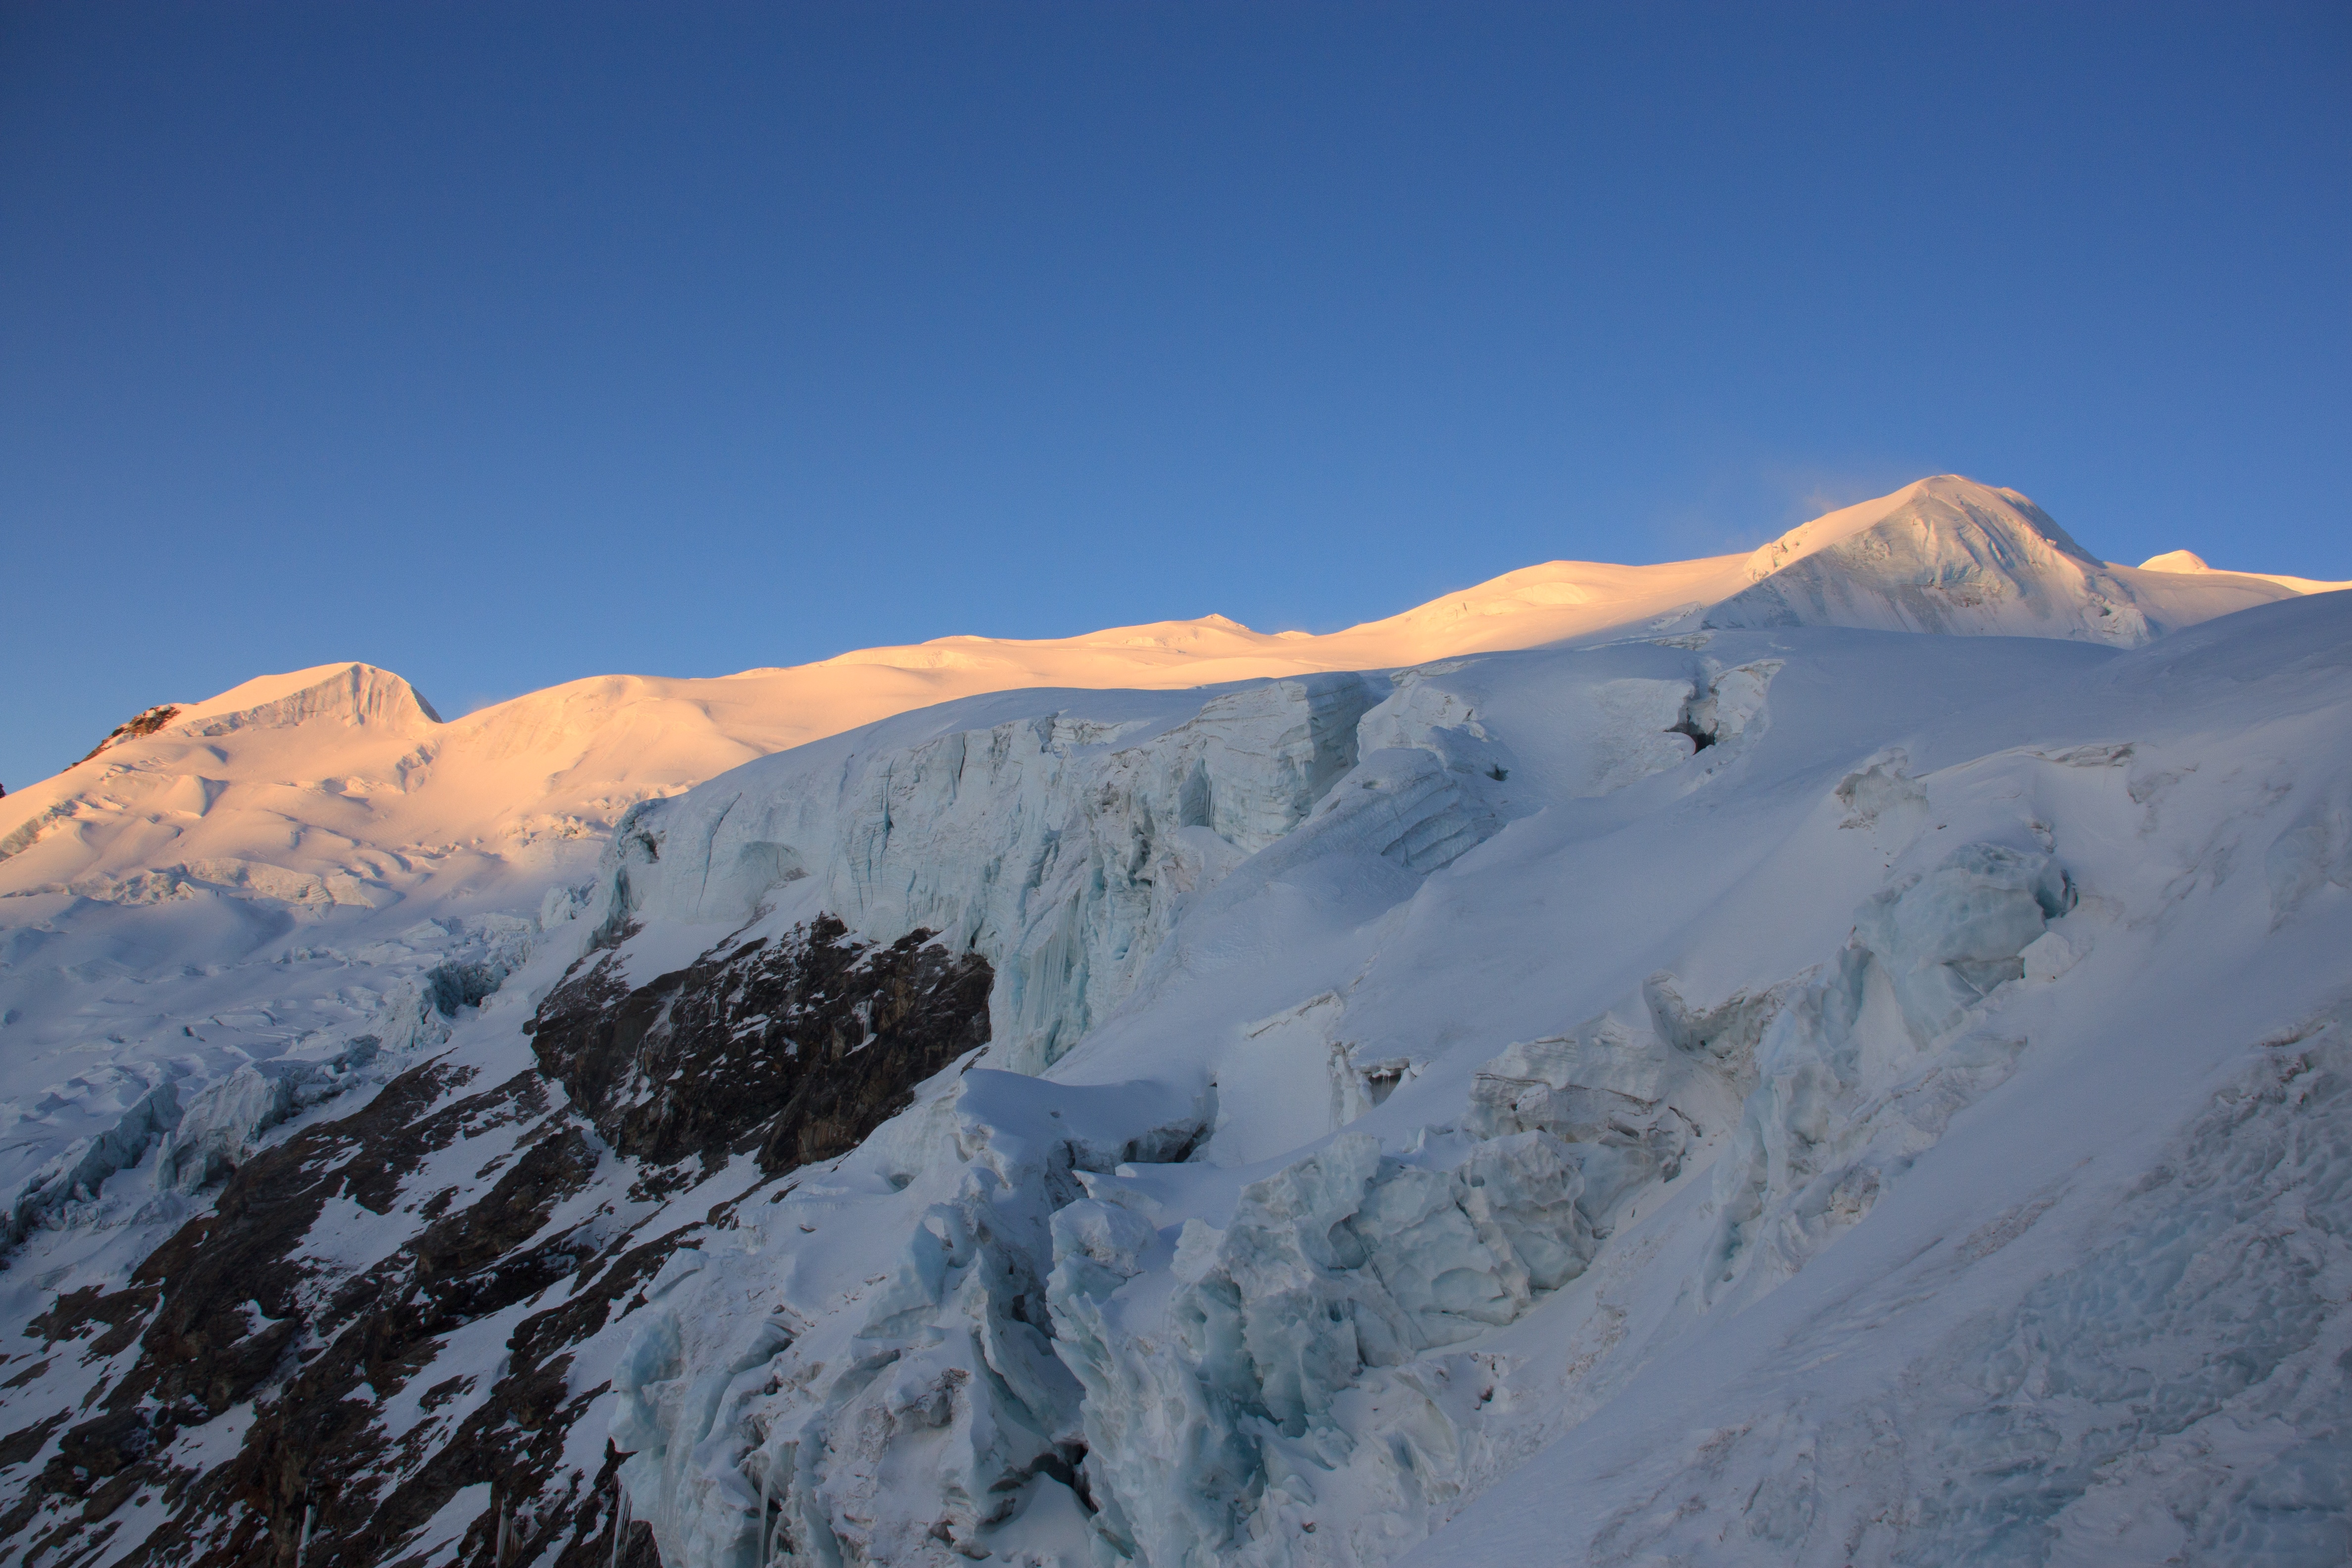 Looking towards the summit at sunrise from High Camp